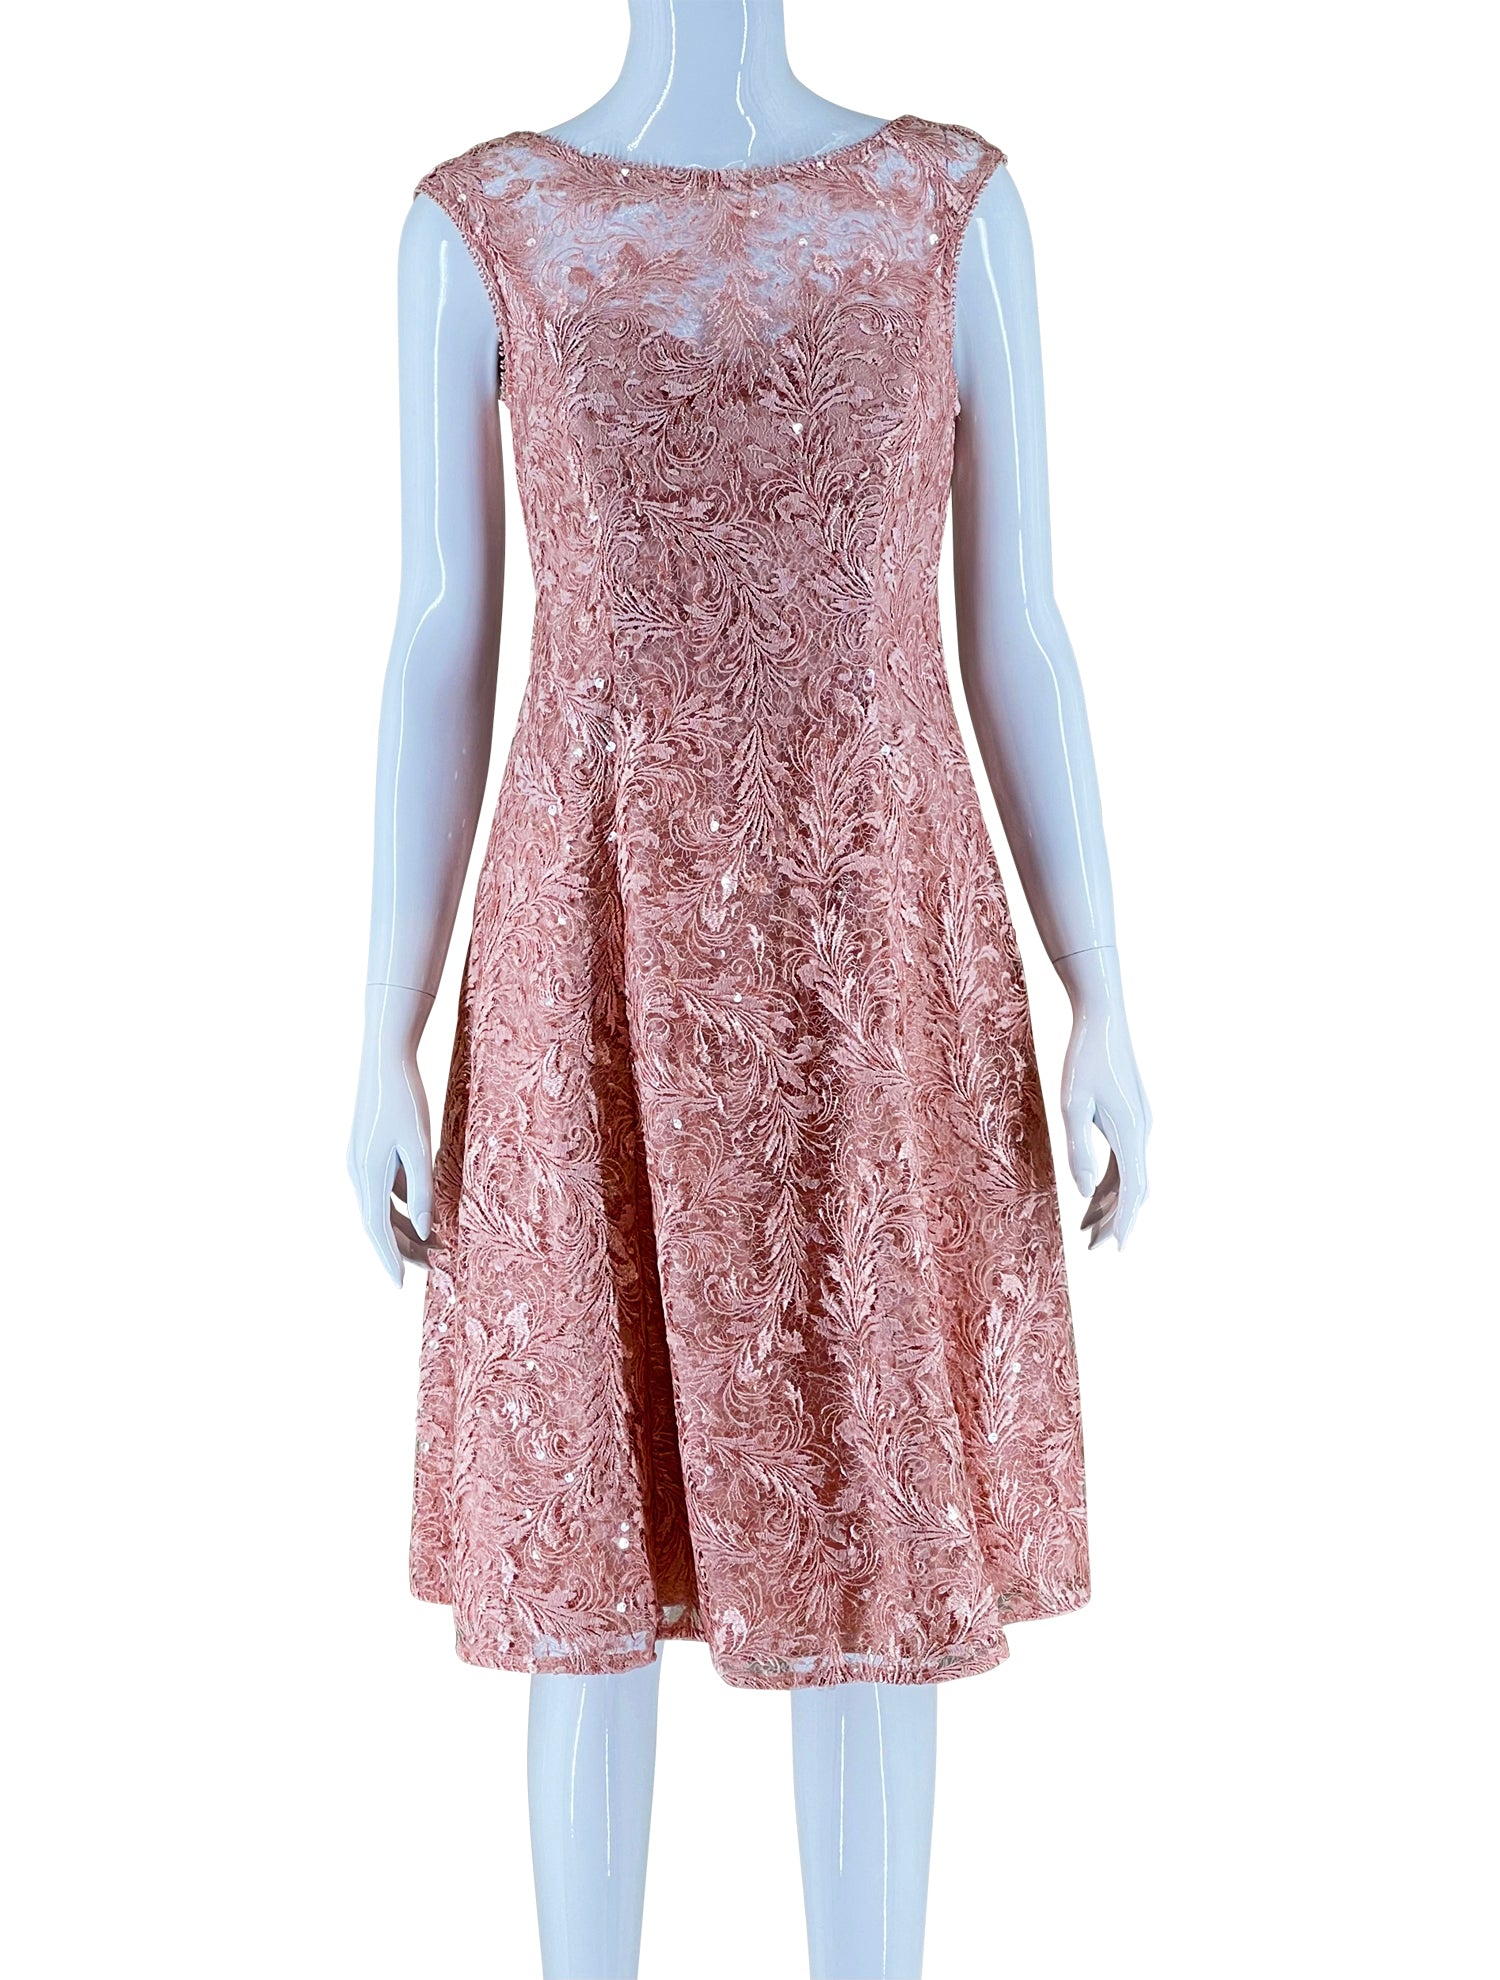 Adrianna Papell Lace Embellished Cocktail Dress